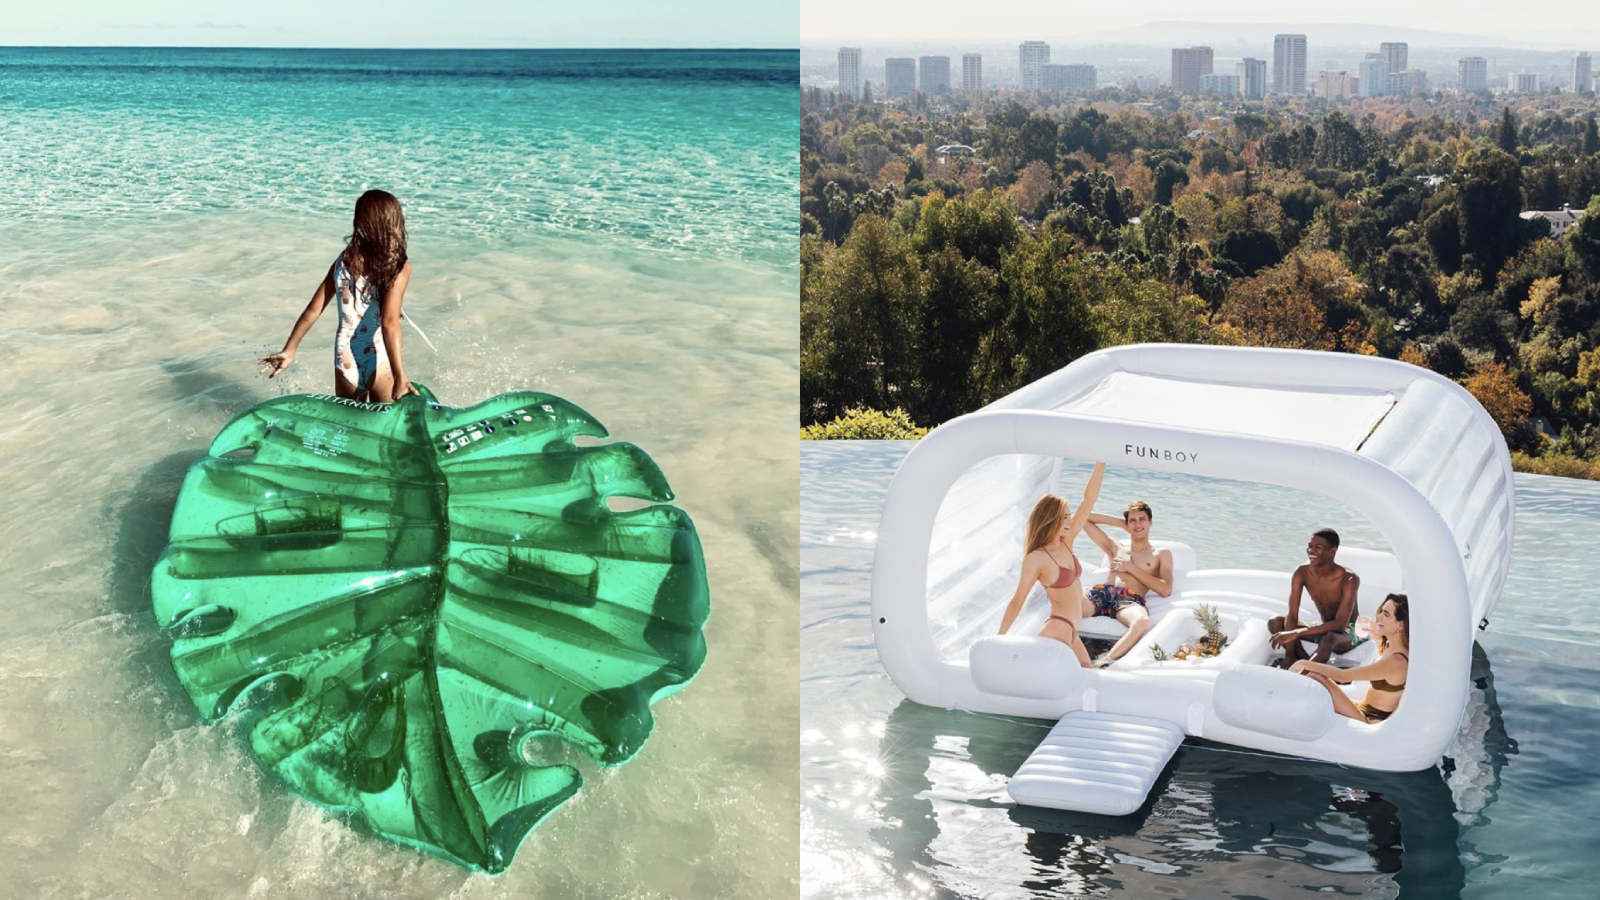 pool floats for plus size adults